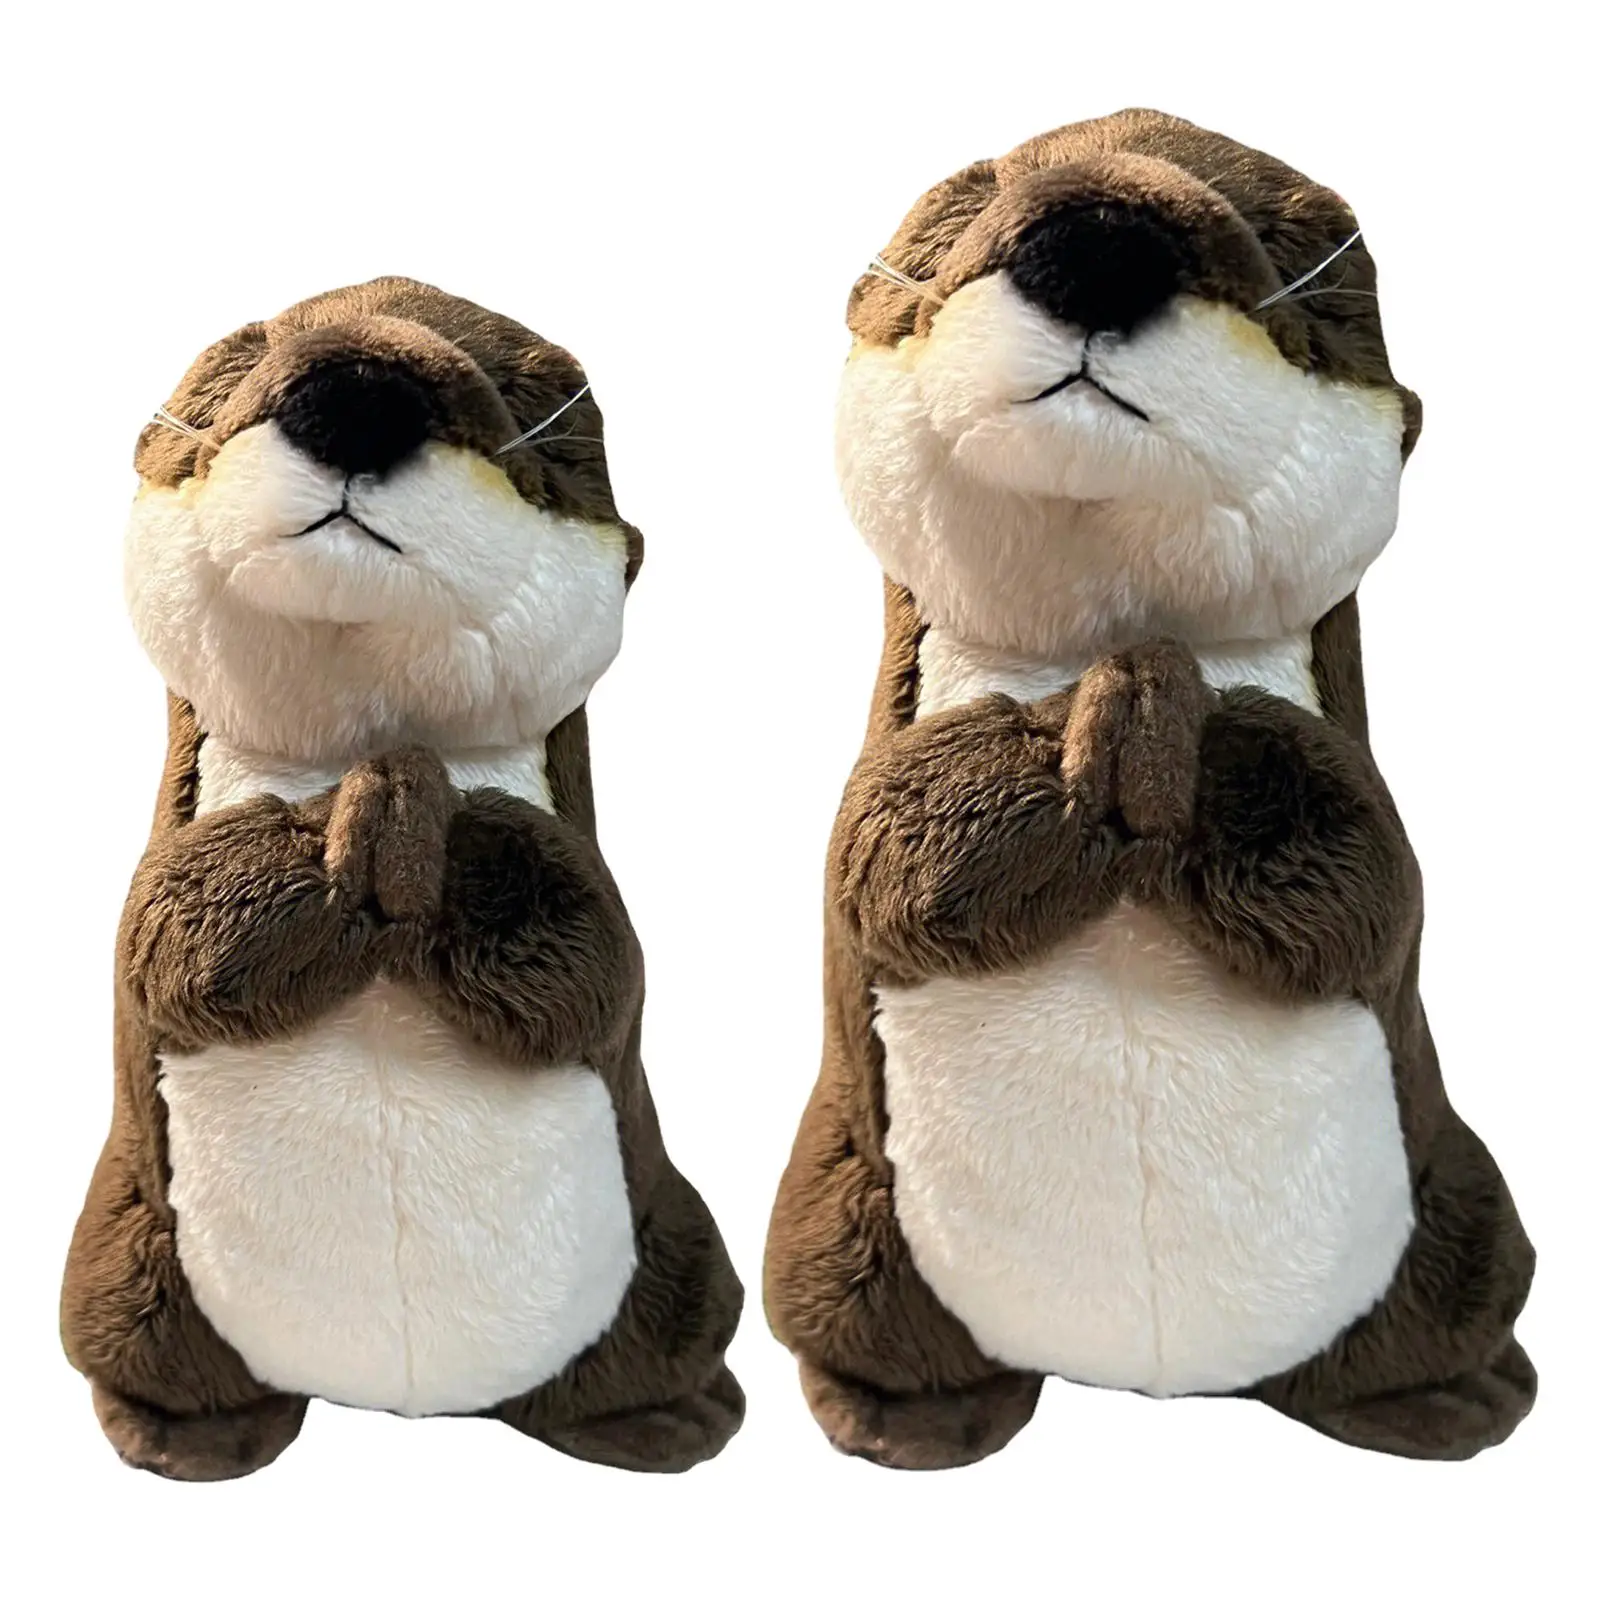 Otter Stuffed Animal Plush River Animals Living Room Decoration Soft Toy for Children Boys Girls Adults Teens Creative Gifts